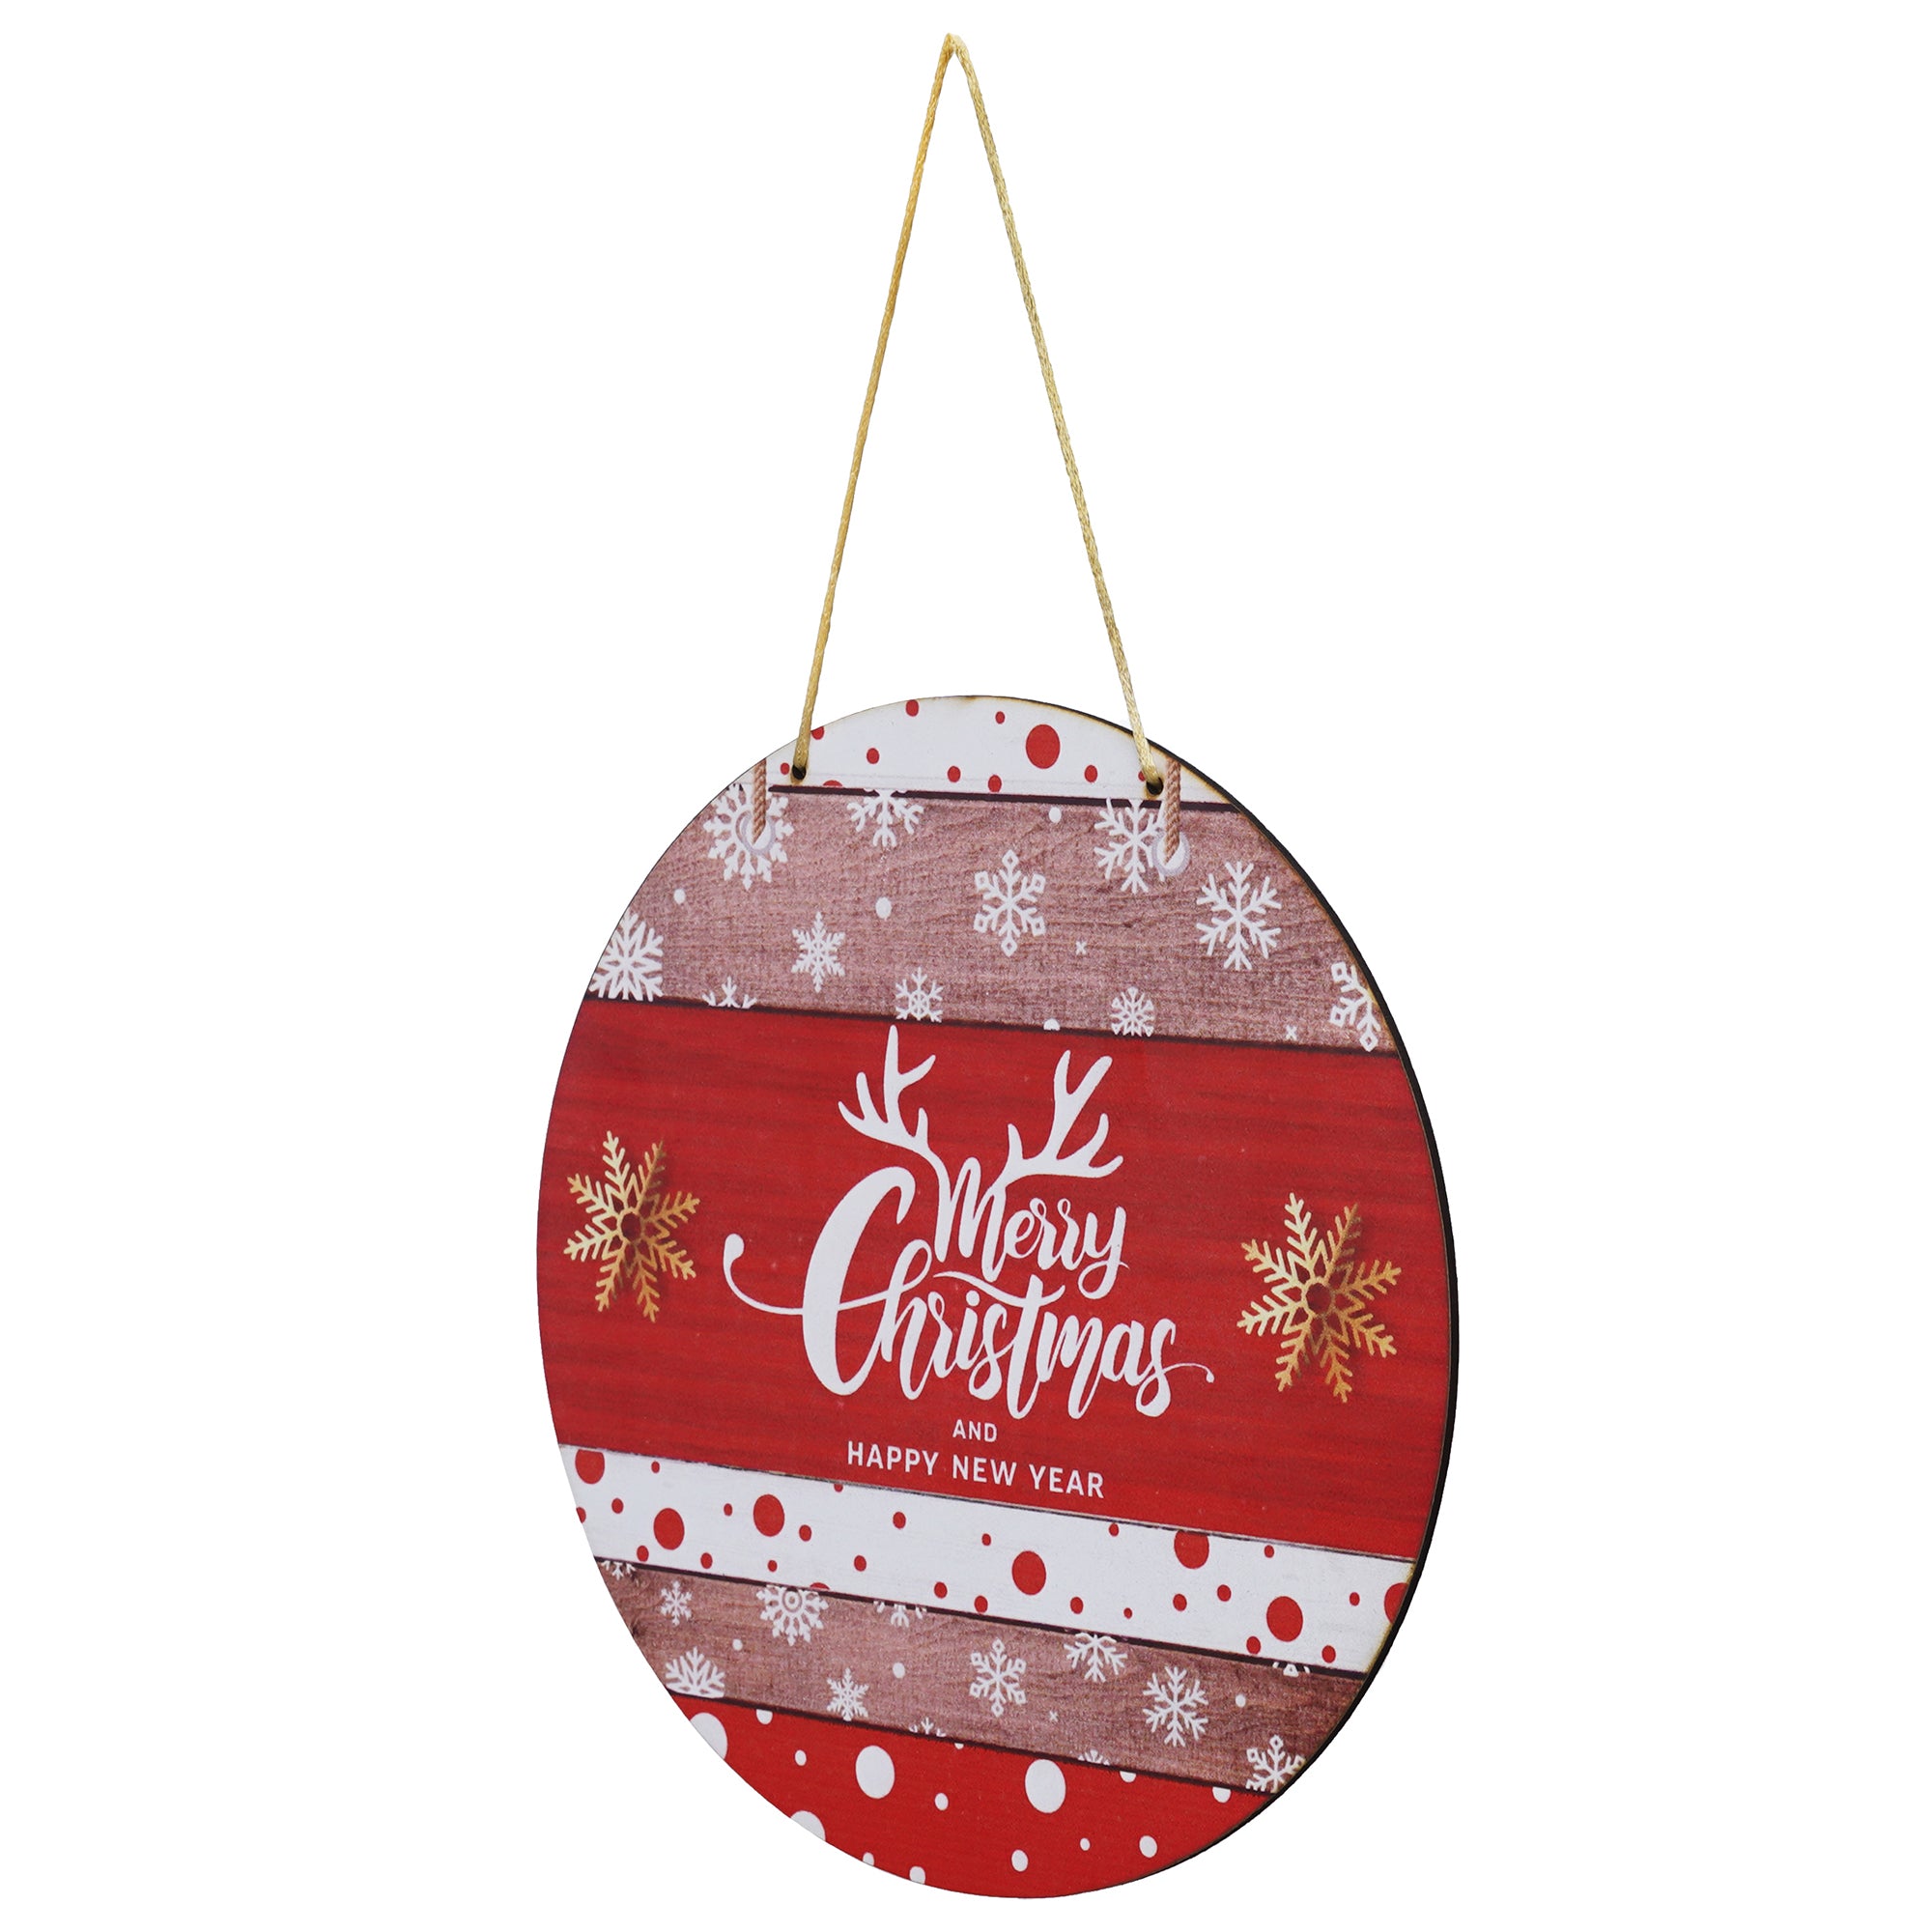 eCraftIndia "Merry Christmas and Happy New Year" Printed Wooden Door Wall Hanging for Home and Christmas Tree Decorations (Red, White, Golden) 7